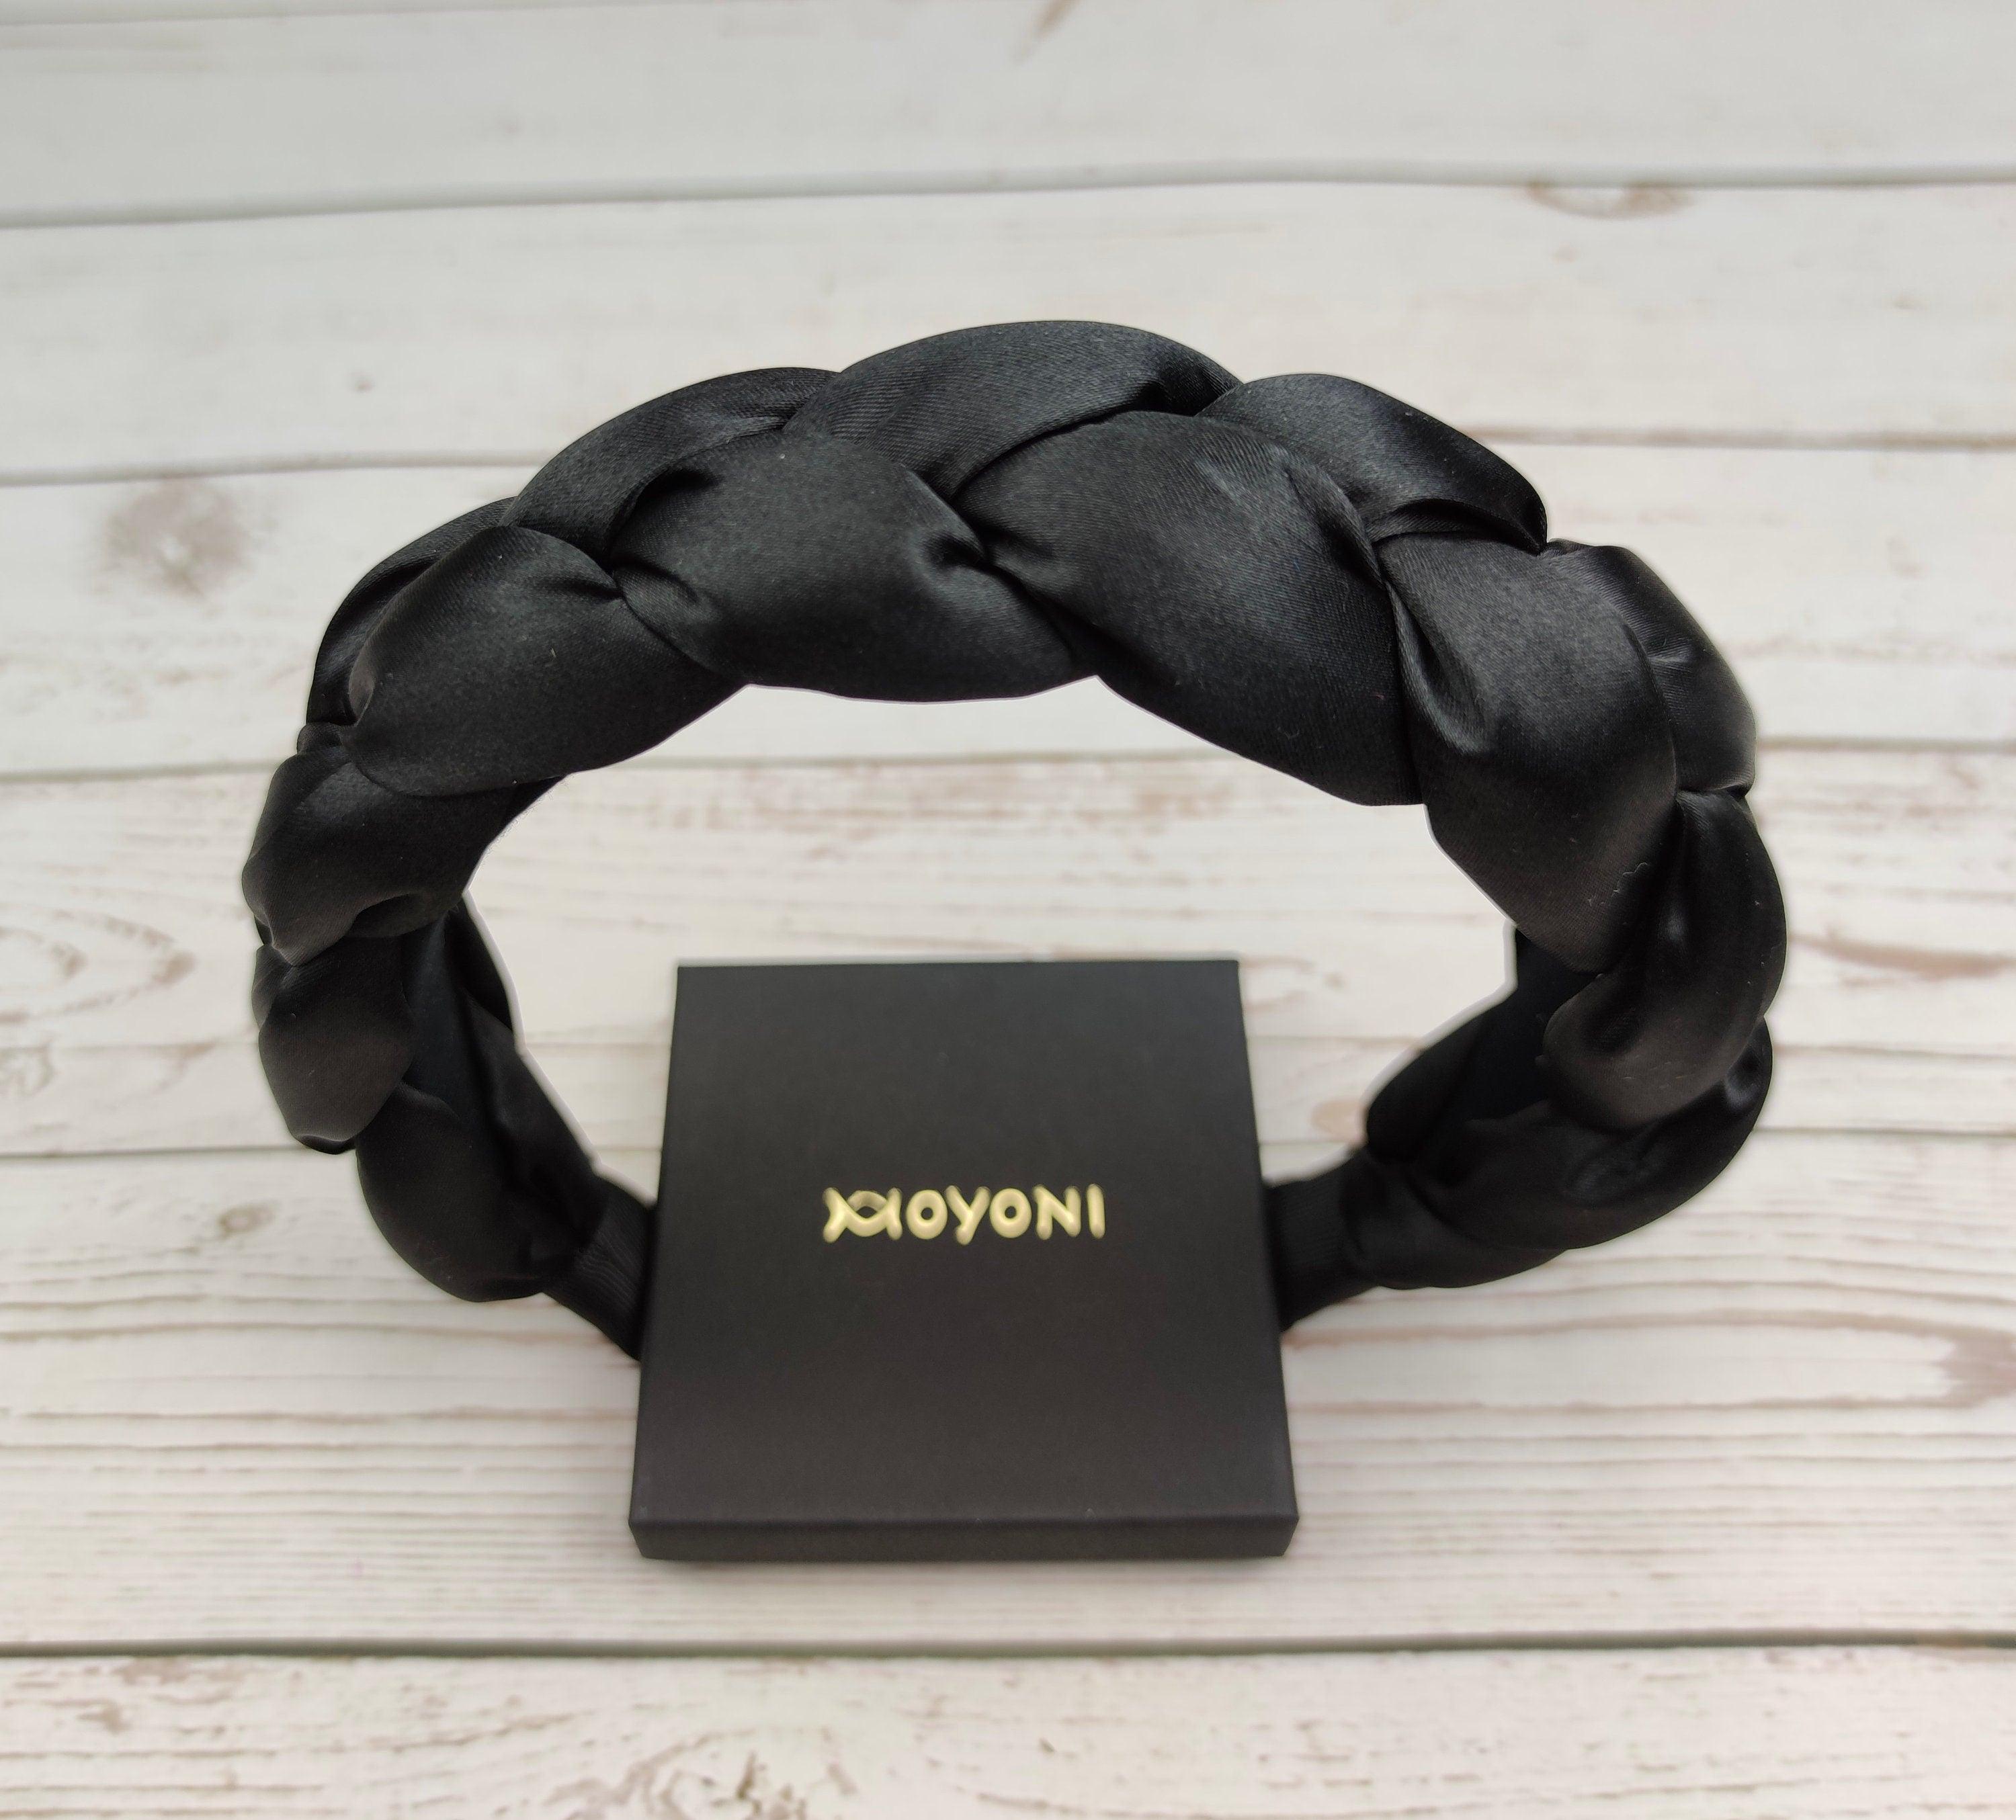 High-Quality Black Padded Satin Headband with Braided Design - Fashionable and Stylish Headband for Women and Girl available at Moyoni Design